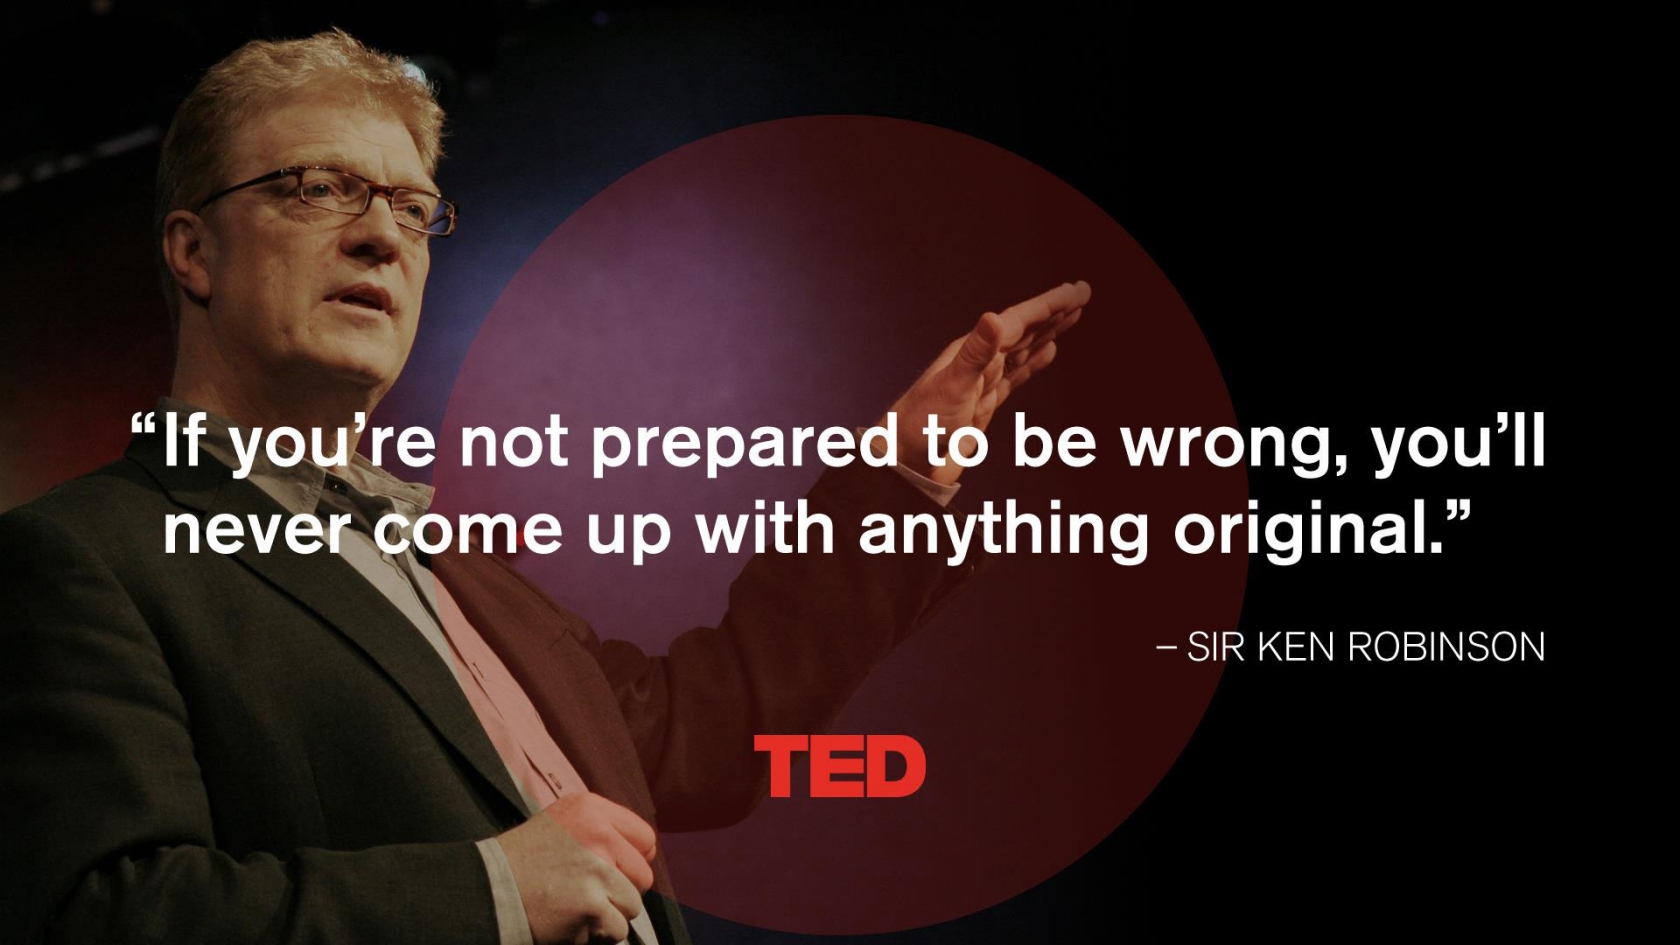 Sir Ken Robinson Quote for 1680 x 945 HDTV resolution